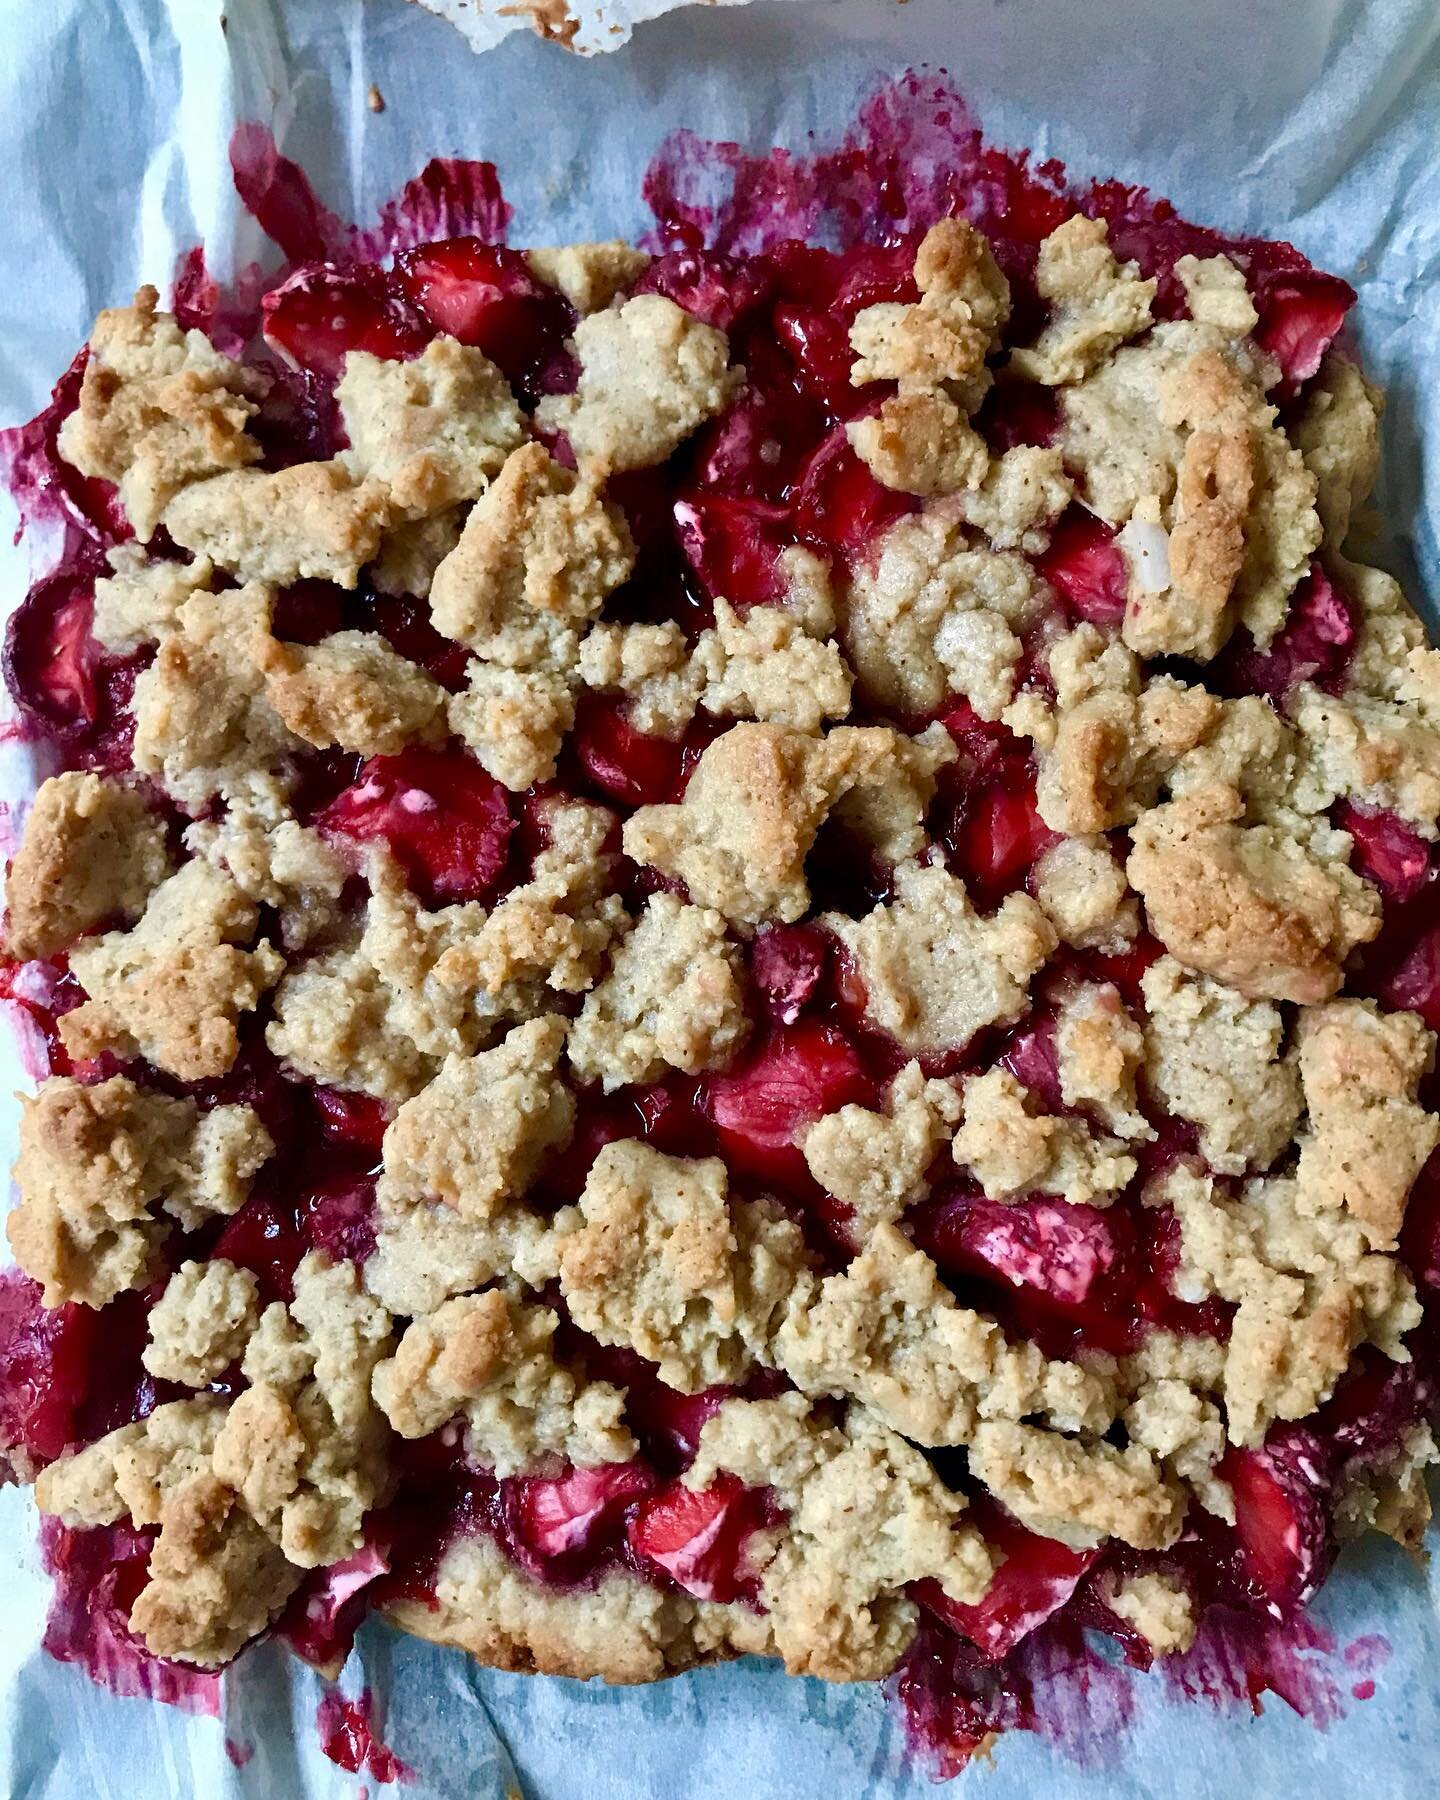 🍓 It&rsquo;s strawberry season and to celebrate the Strawberry Full Moon here is a Paleo &amp; Vegan Strawberry Crumble Recipe 🌕 
For the crust
1 1/4 cup almond flour
1/4 cup coconut flour
3/4 cup shredded coconut 
1/3 cup maple syrup 
2 tablespoon